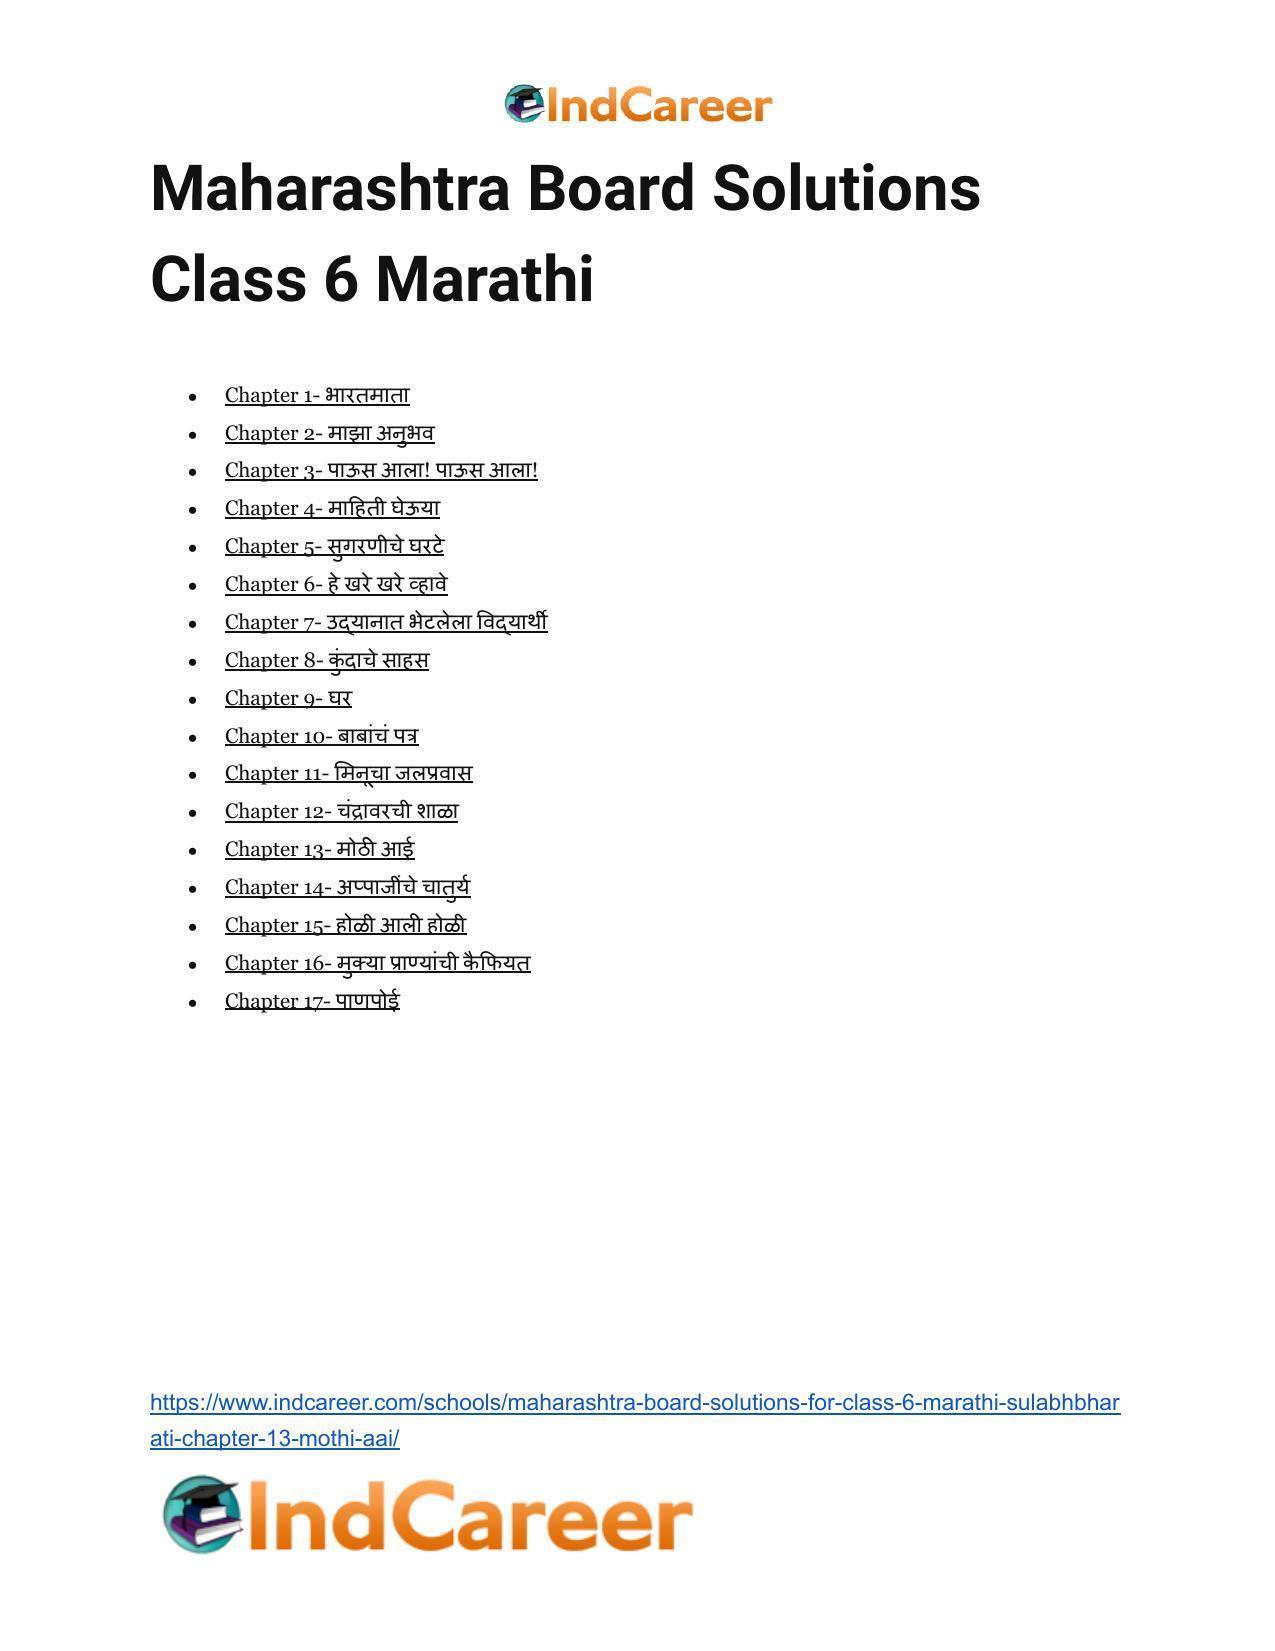 Maharashtra Board Solutions for Class 6- Marathi Sulabhbharati: Chapter 13- मोठी आई - Page 24